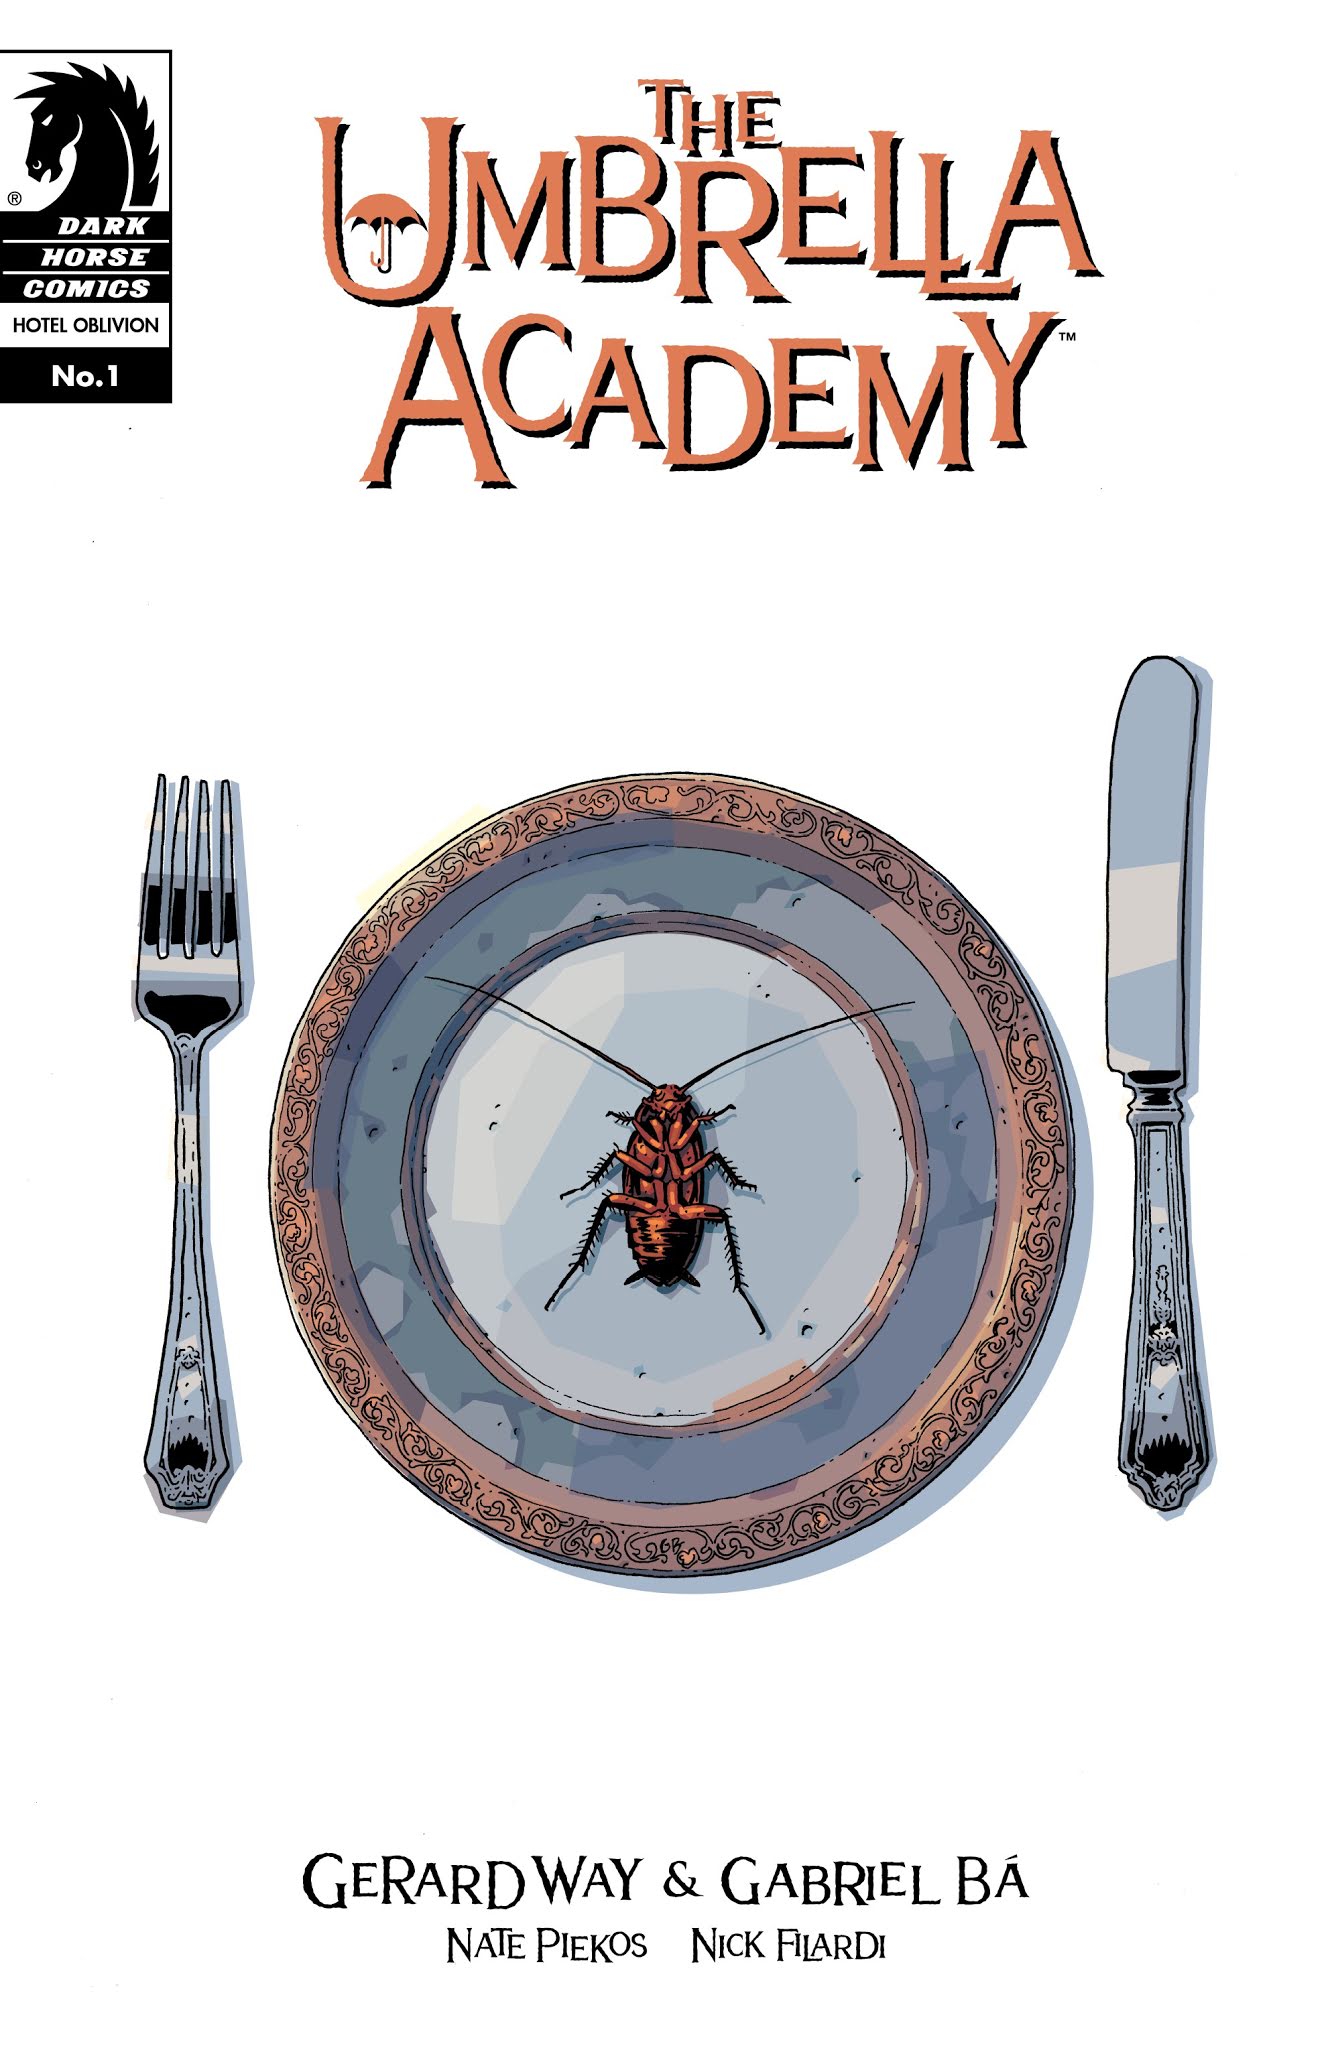 Read online The Umbrella Academy: Hotel Oblivion comic -  Issue #1 - 1